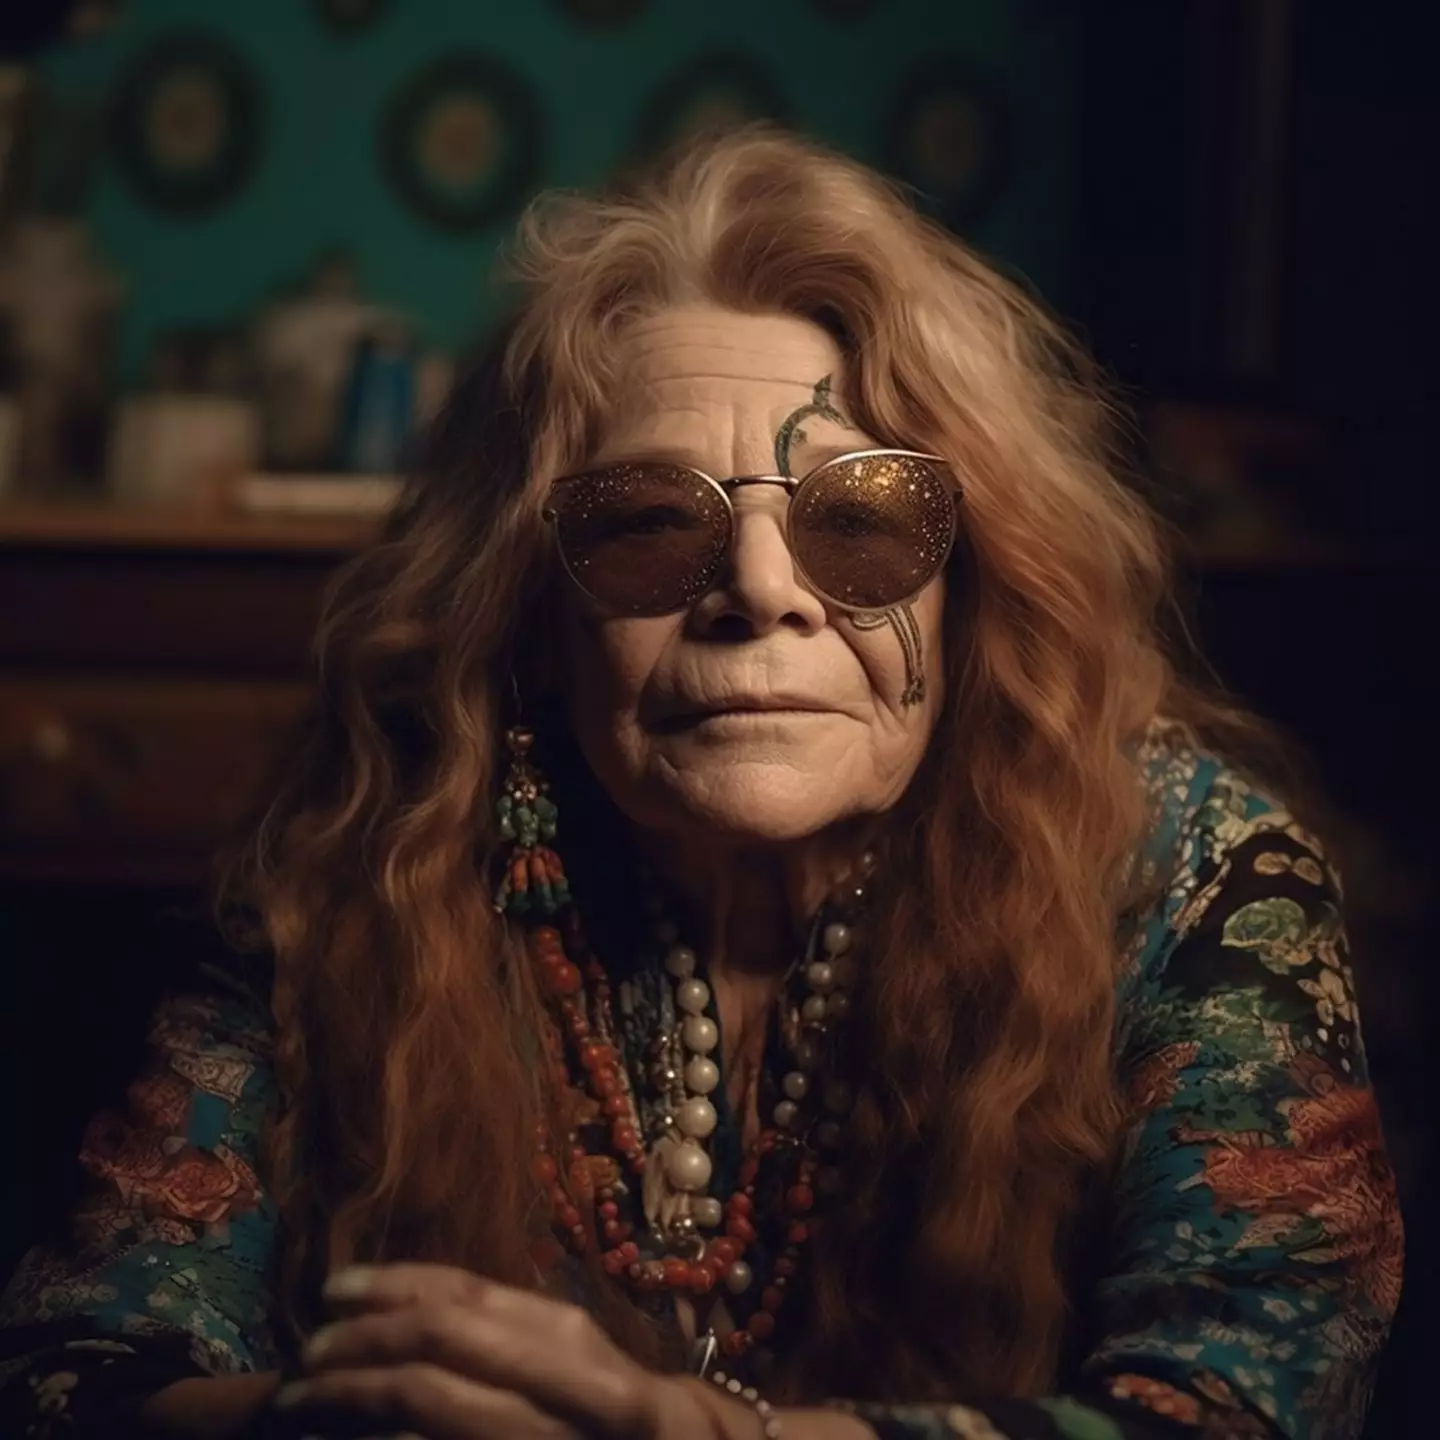 Janis Joplin if she were alive today according to AI.